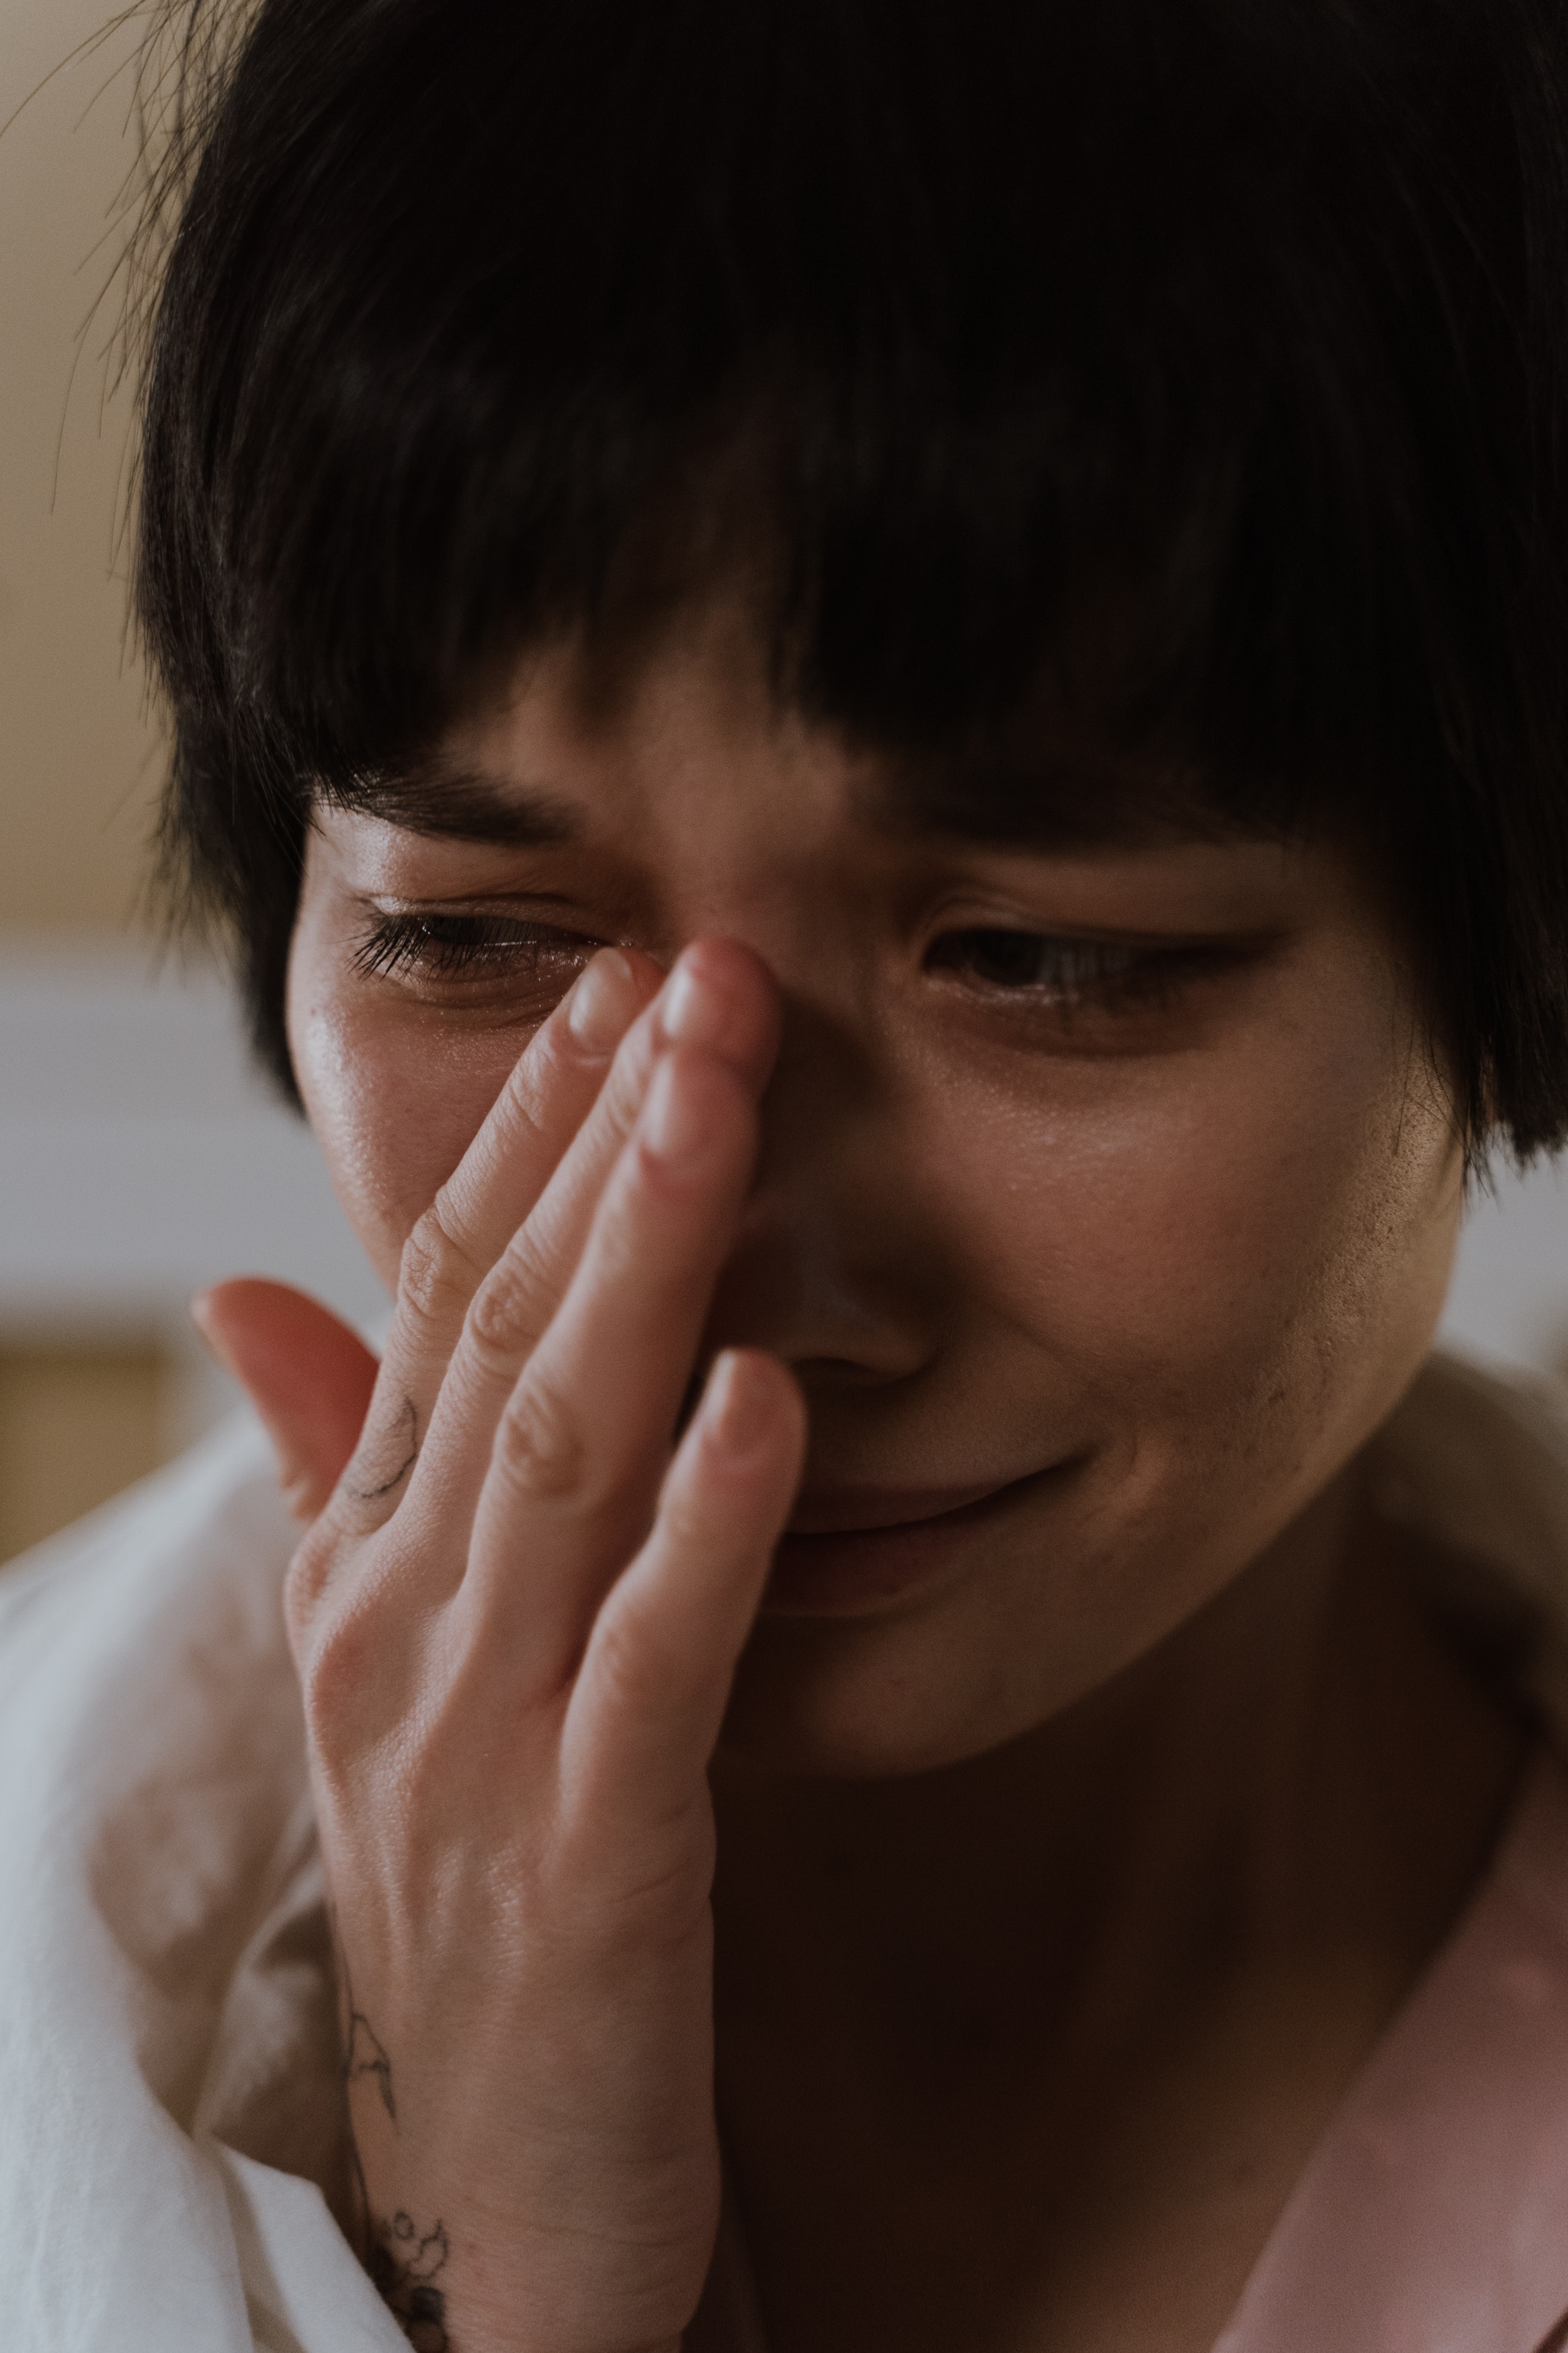 A crying woman. │Source: Pexels